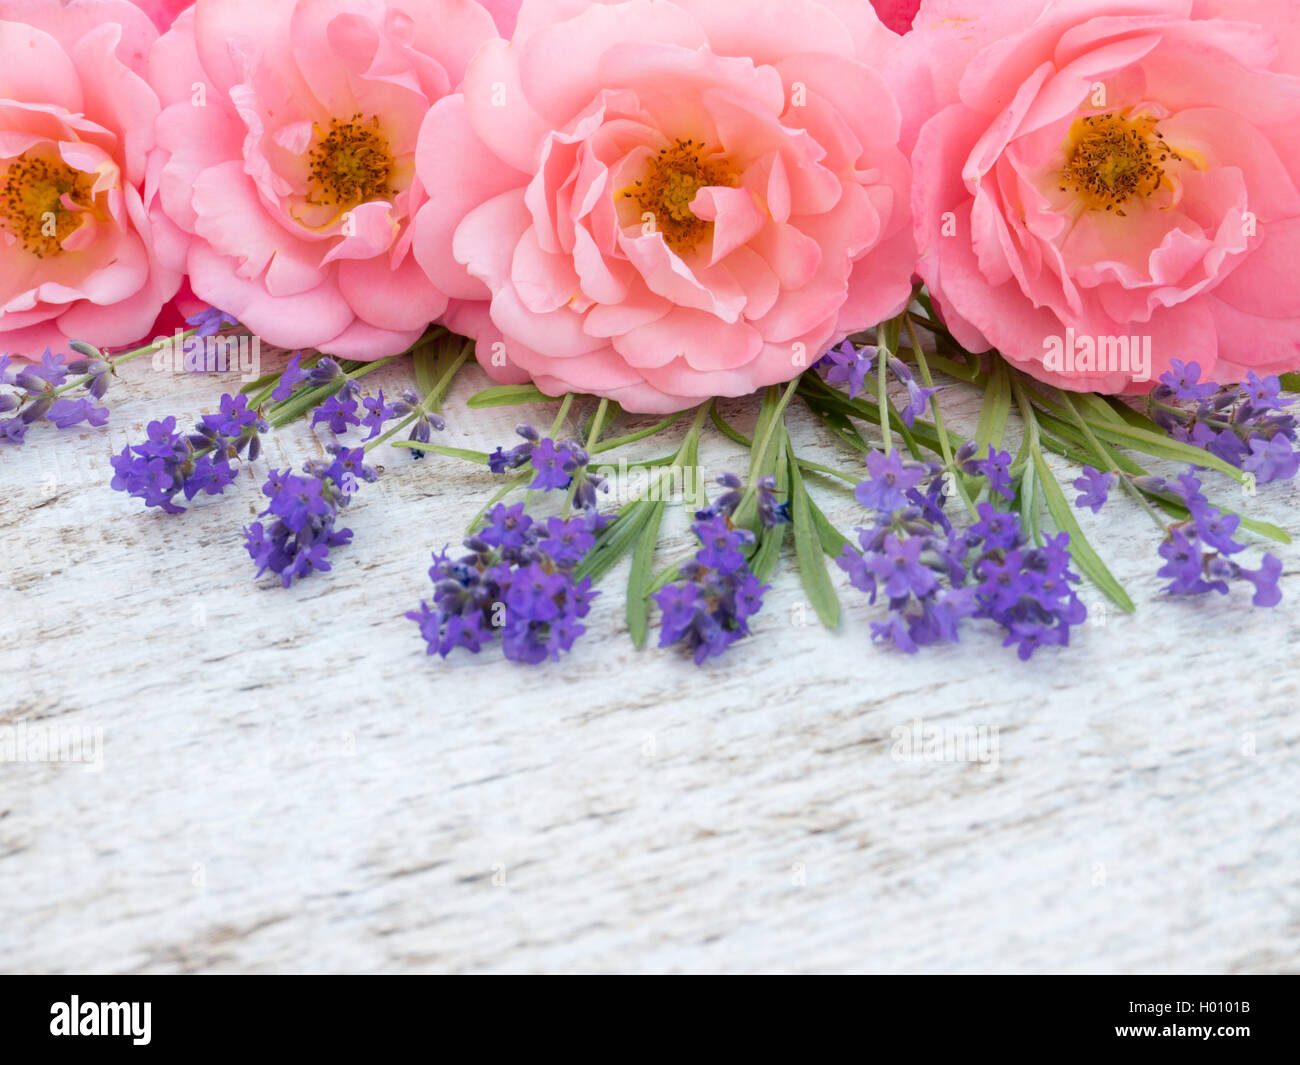 Pink curly open roses and provence lavender on the white rough wooden background Stock Photo